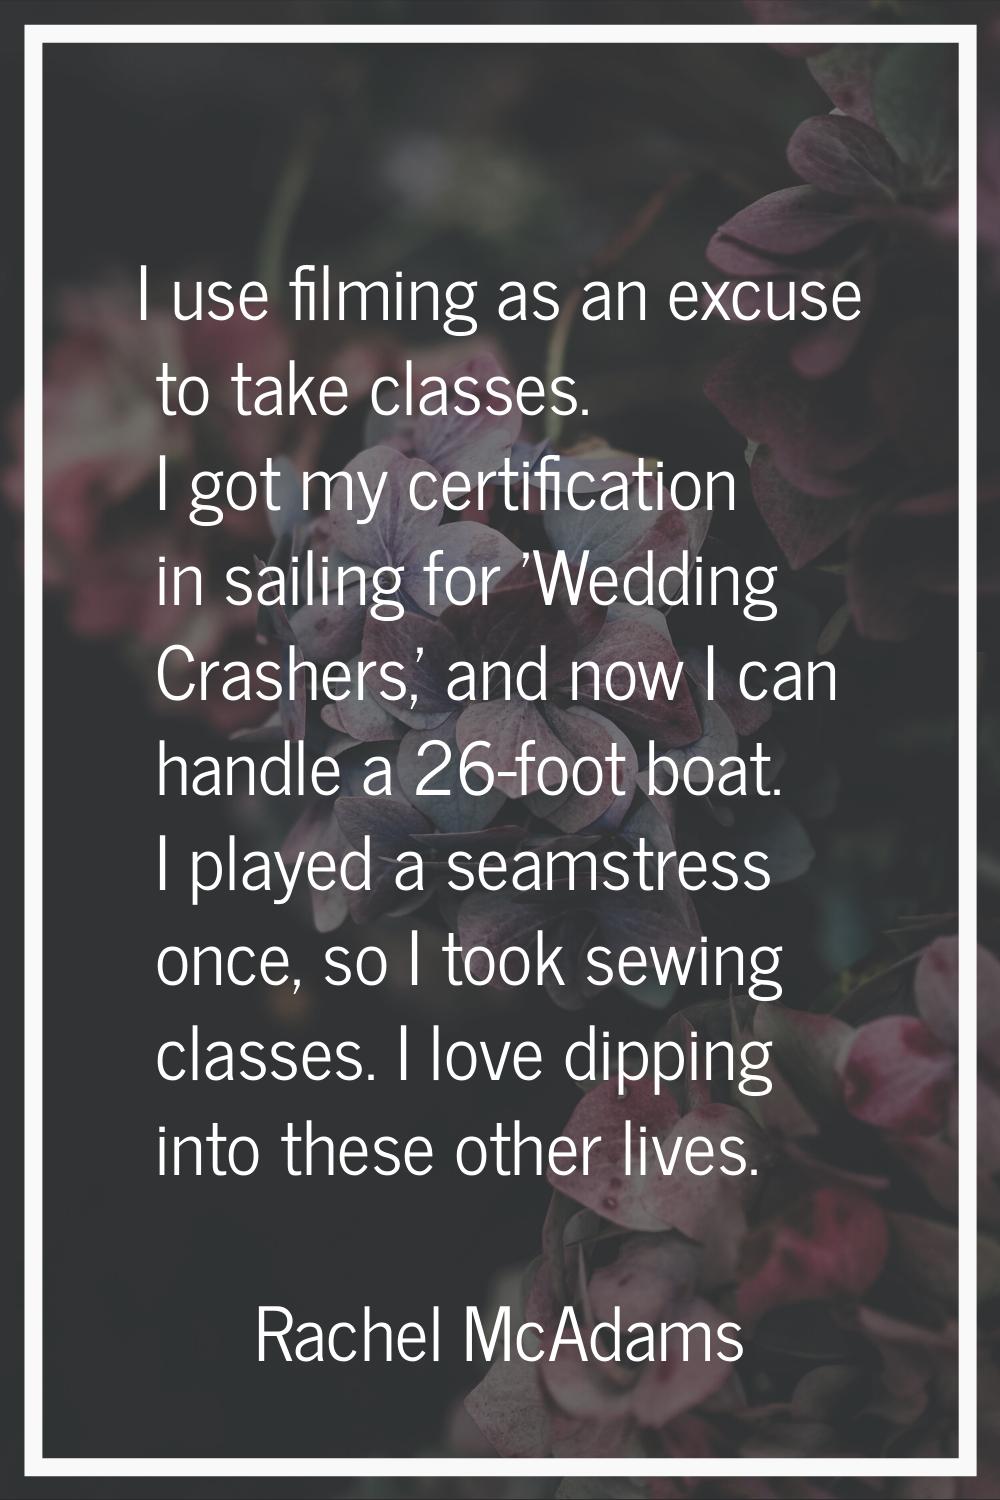 I use filming as an excuse to take classes. I got my certification in sailing for 'Wedding Crashers